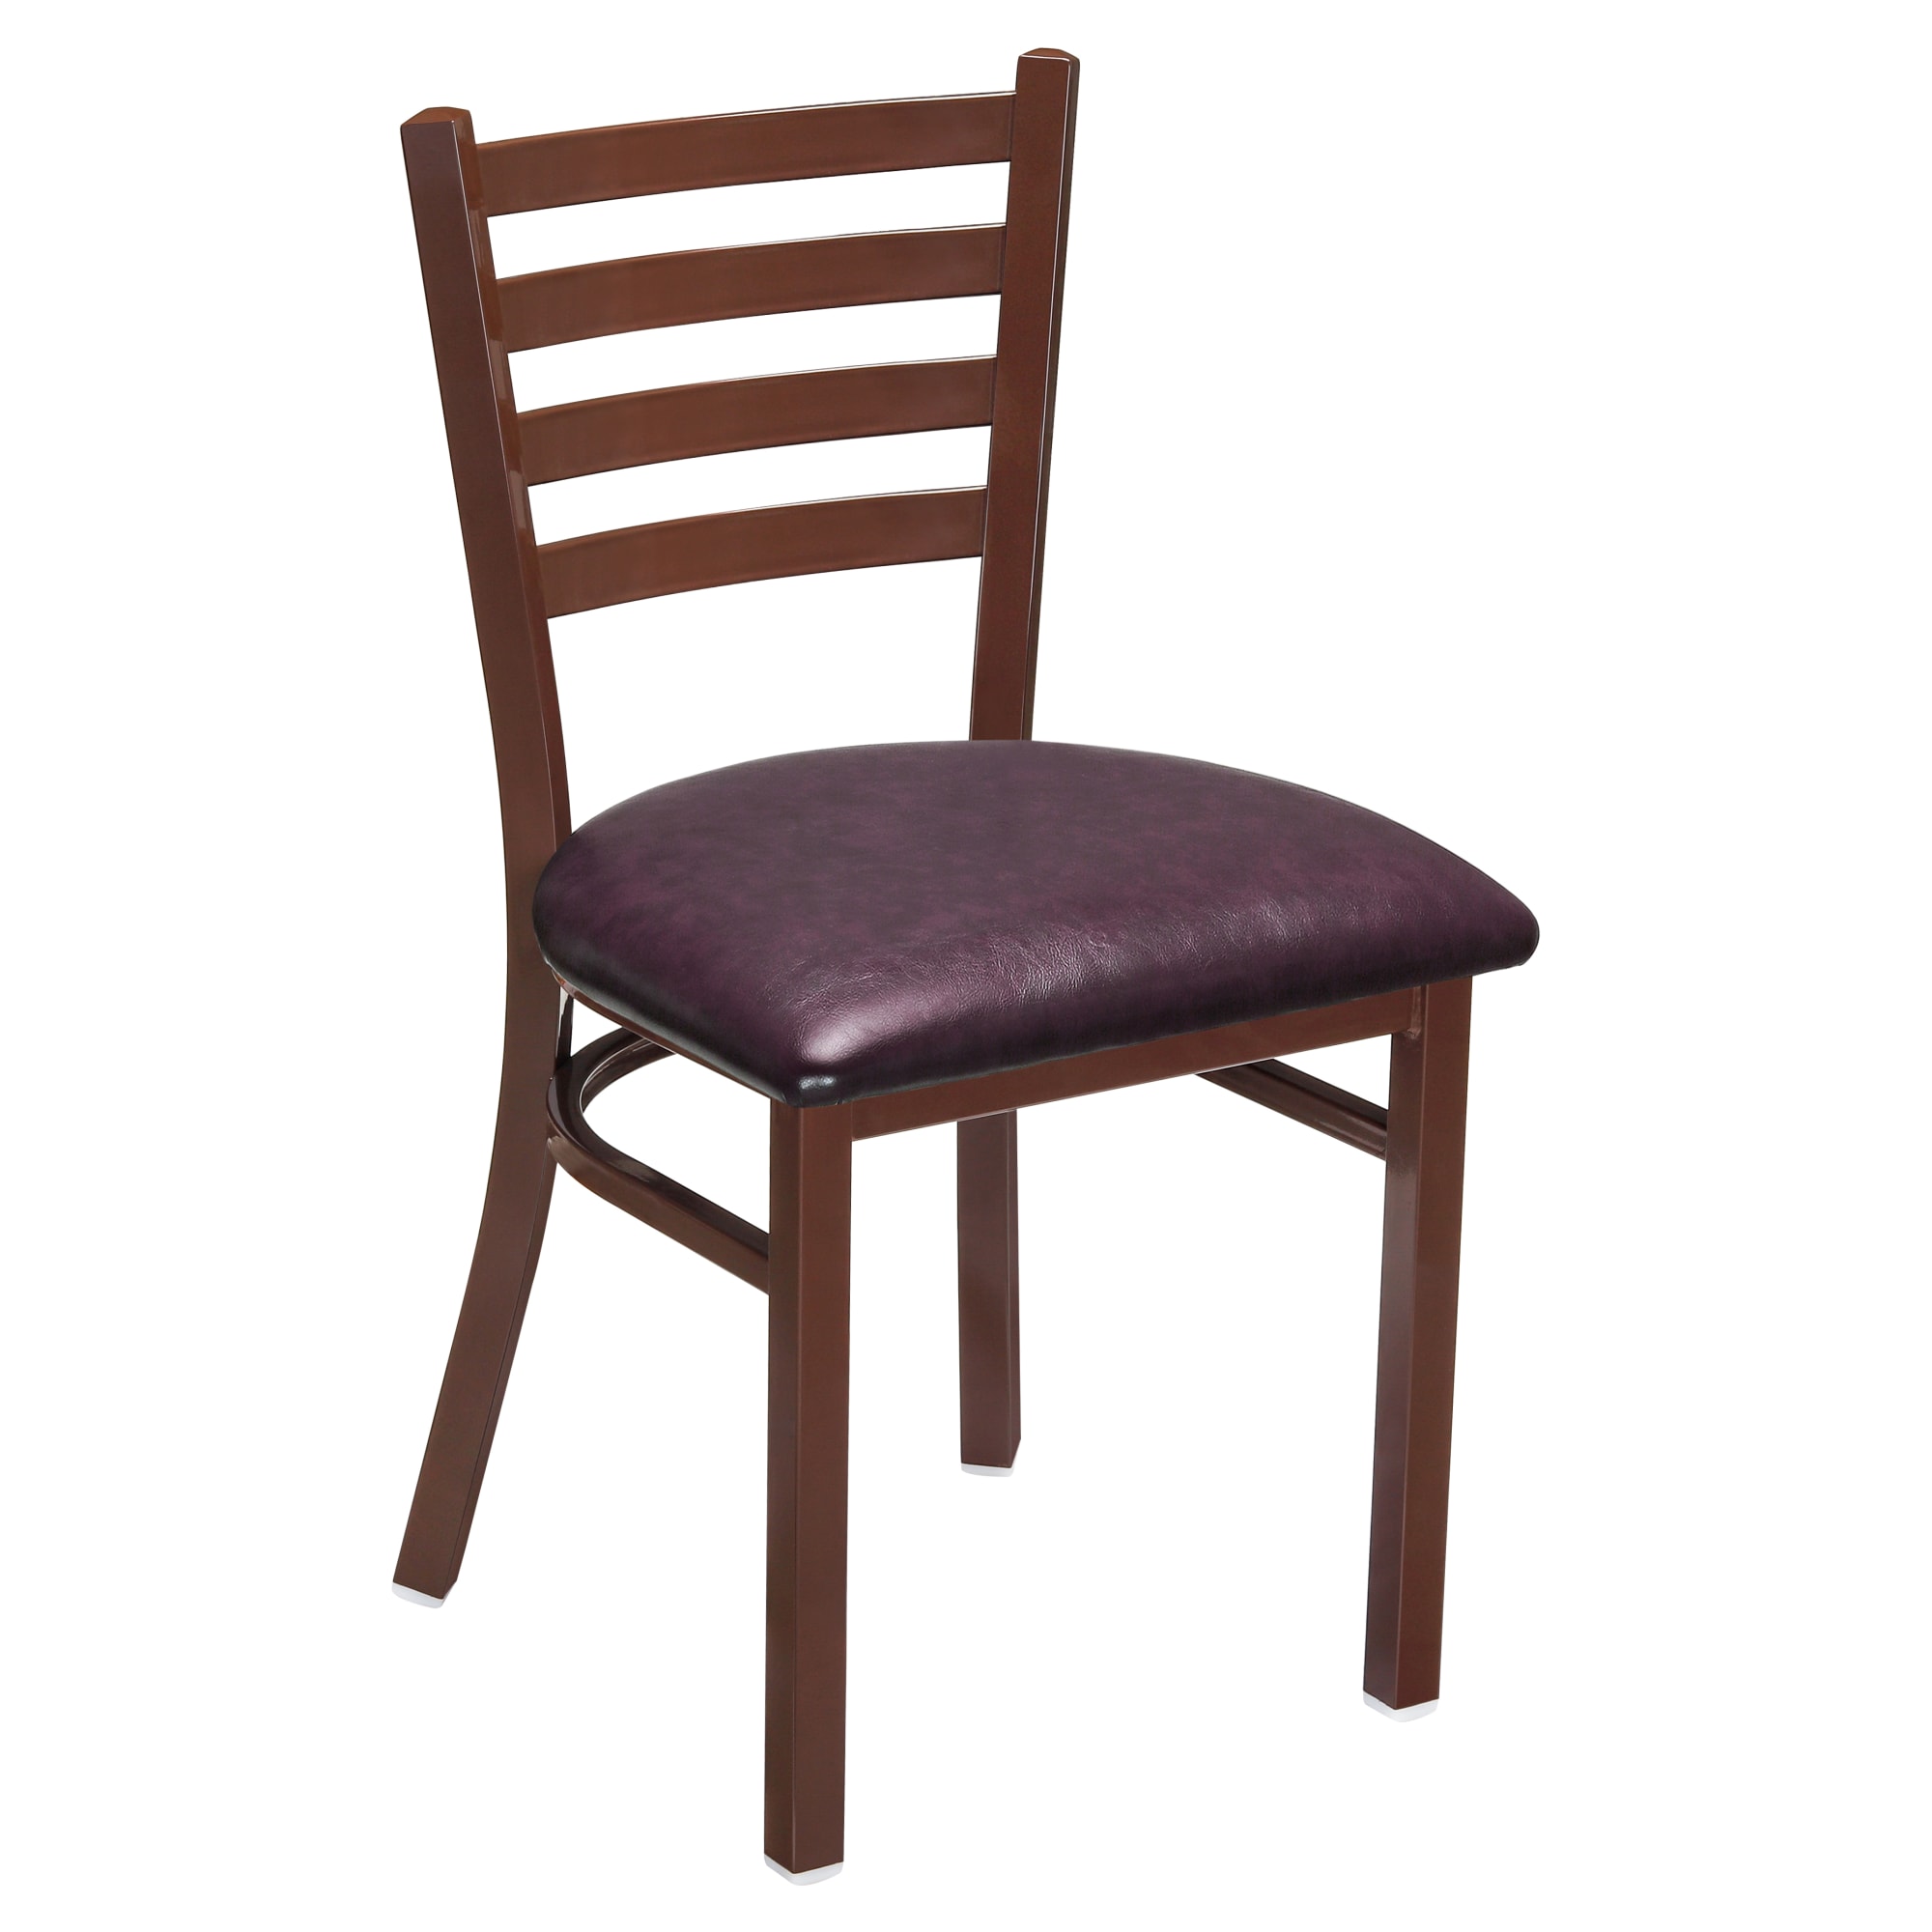 Ladder Back Metal Chair With Brown Finish with Ladder Back Metal Chair With Brown Finish